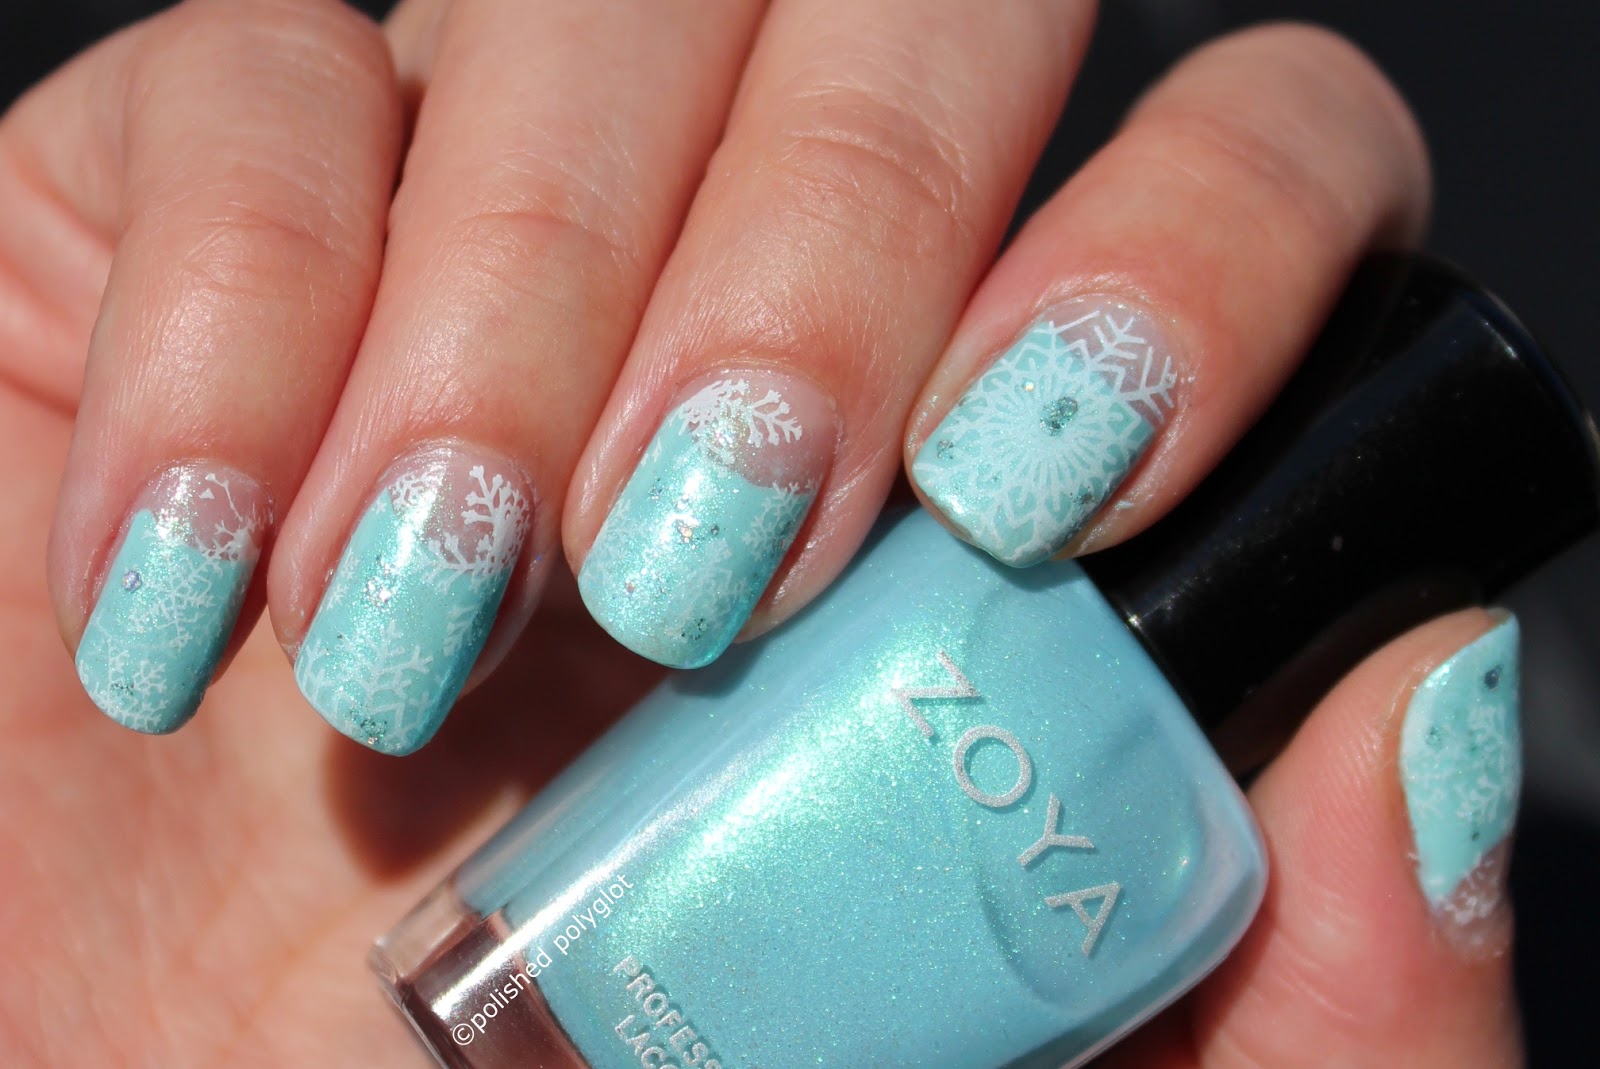 7. Orly Nail Lacquer in "Frozen" - wide 5